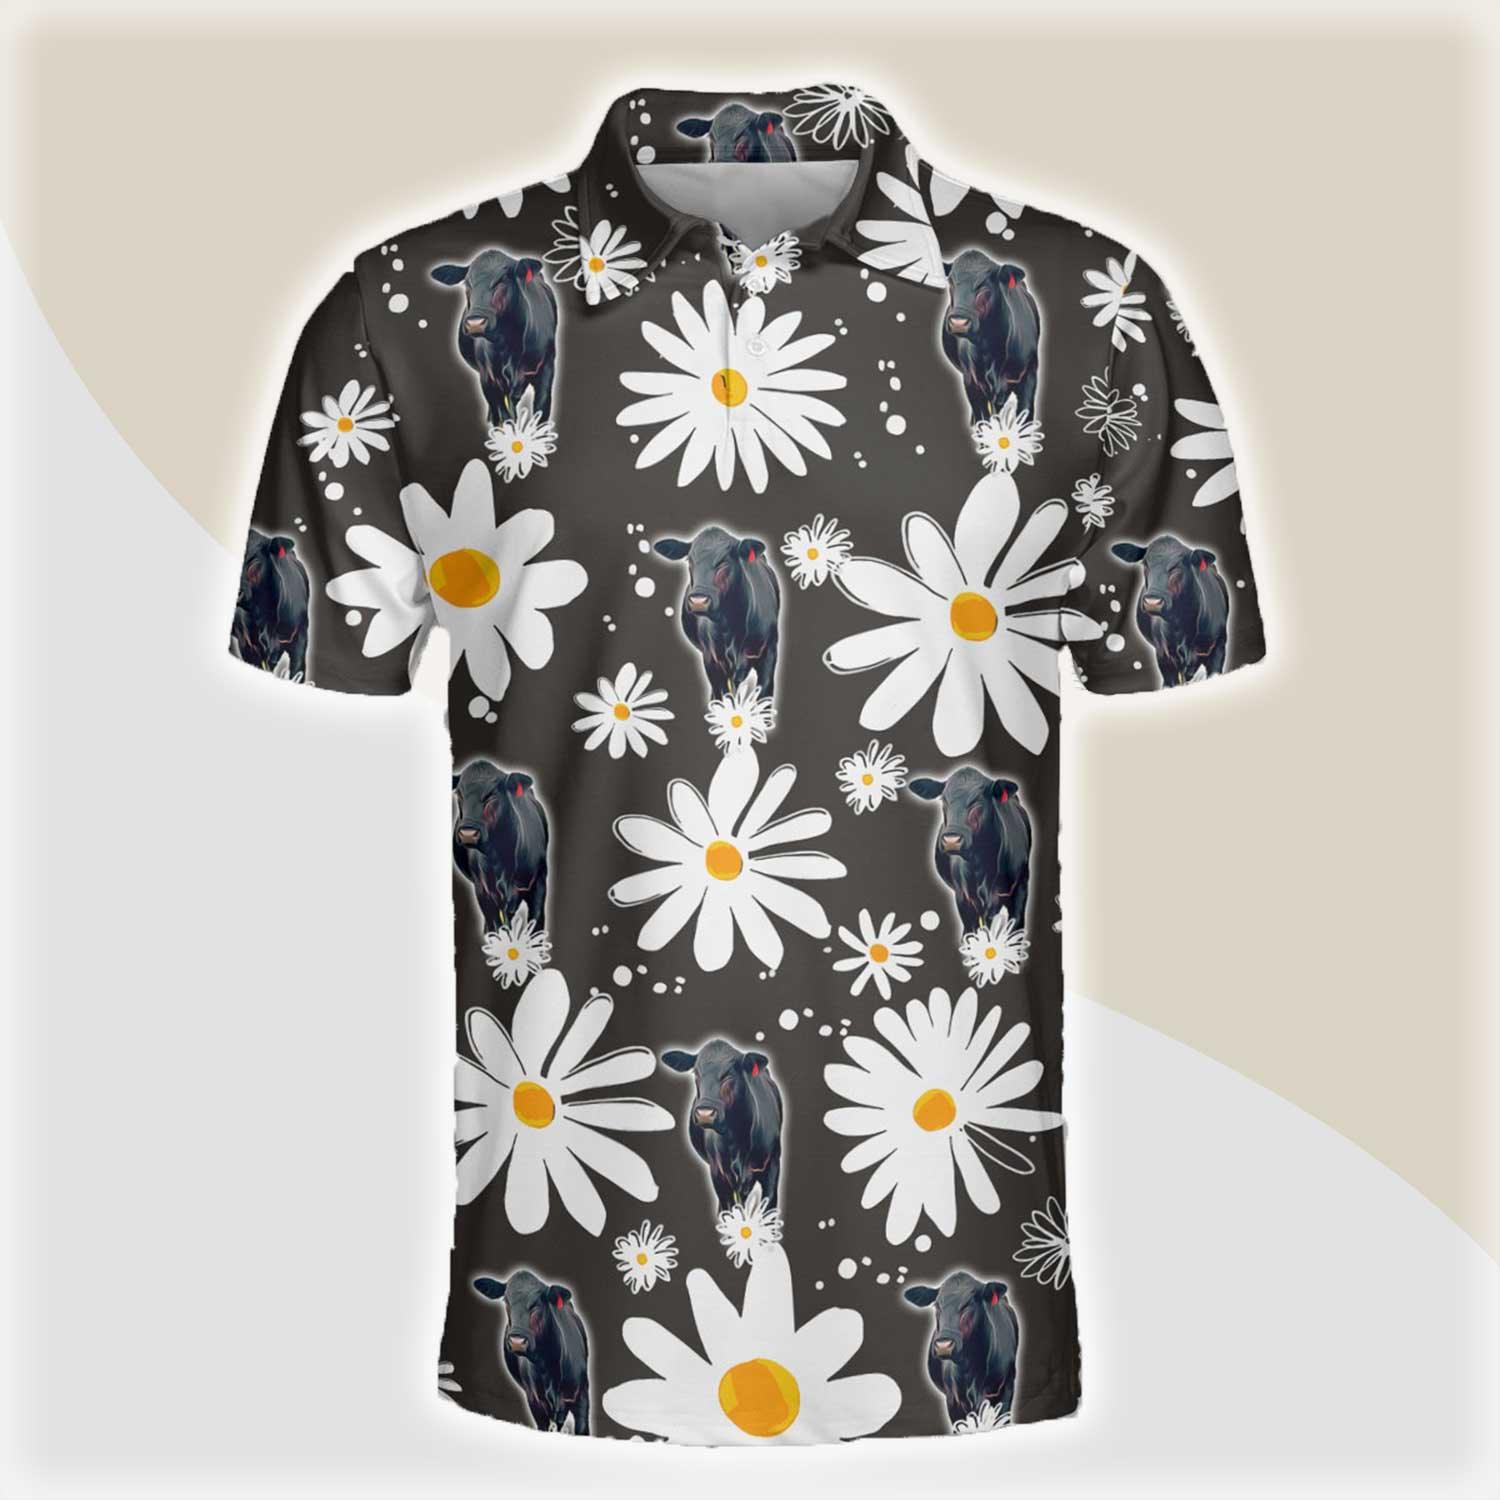 Black Angus Men Polo Shirts - Black Angus Daisy Flower Pattern Button Shirts For Men - Perfect Gift For Black Angus Lovers, Cattle Lovers - Amzanimalsgift